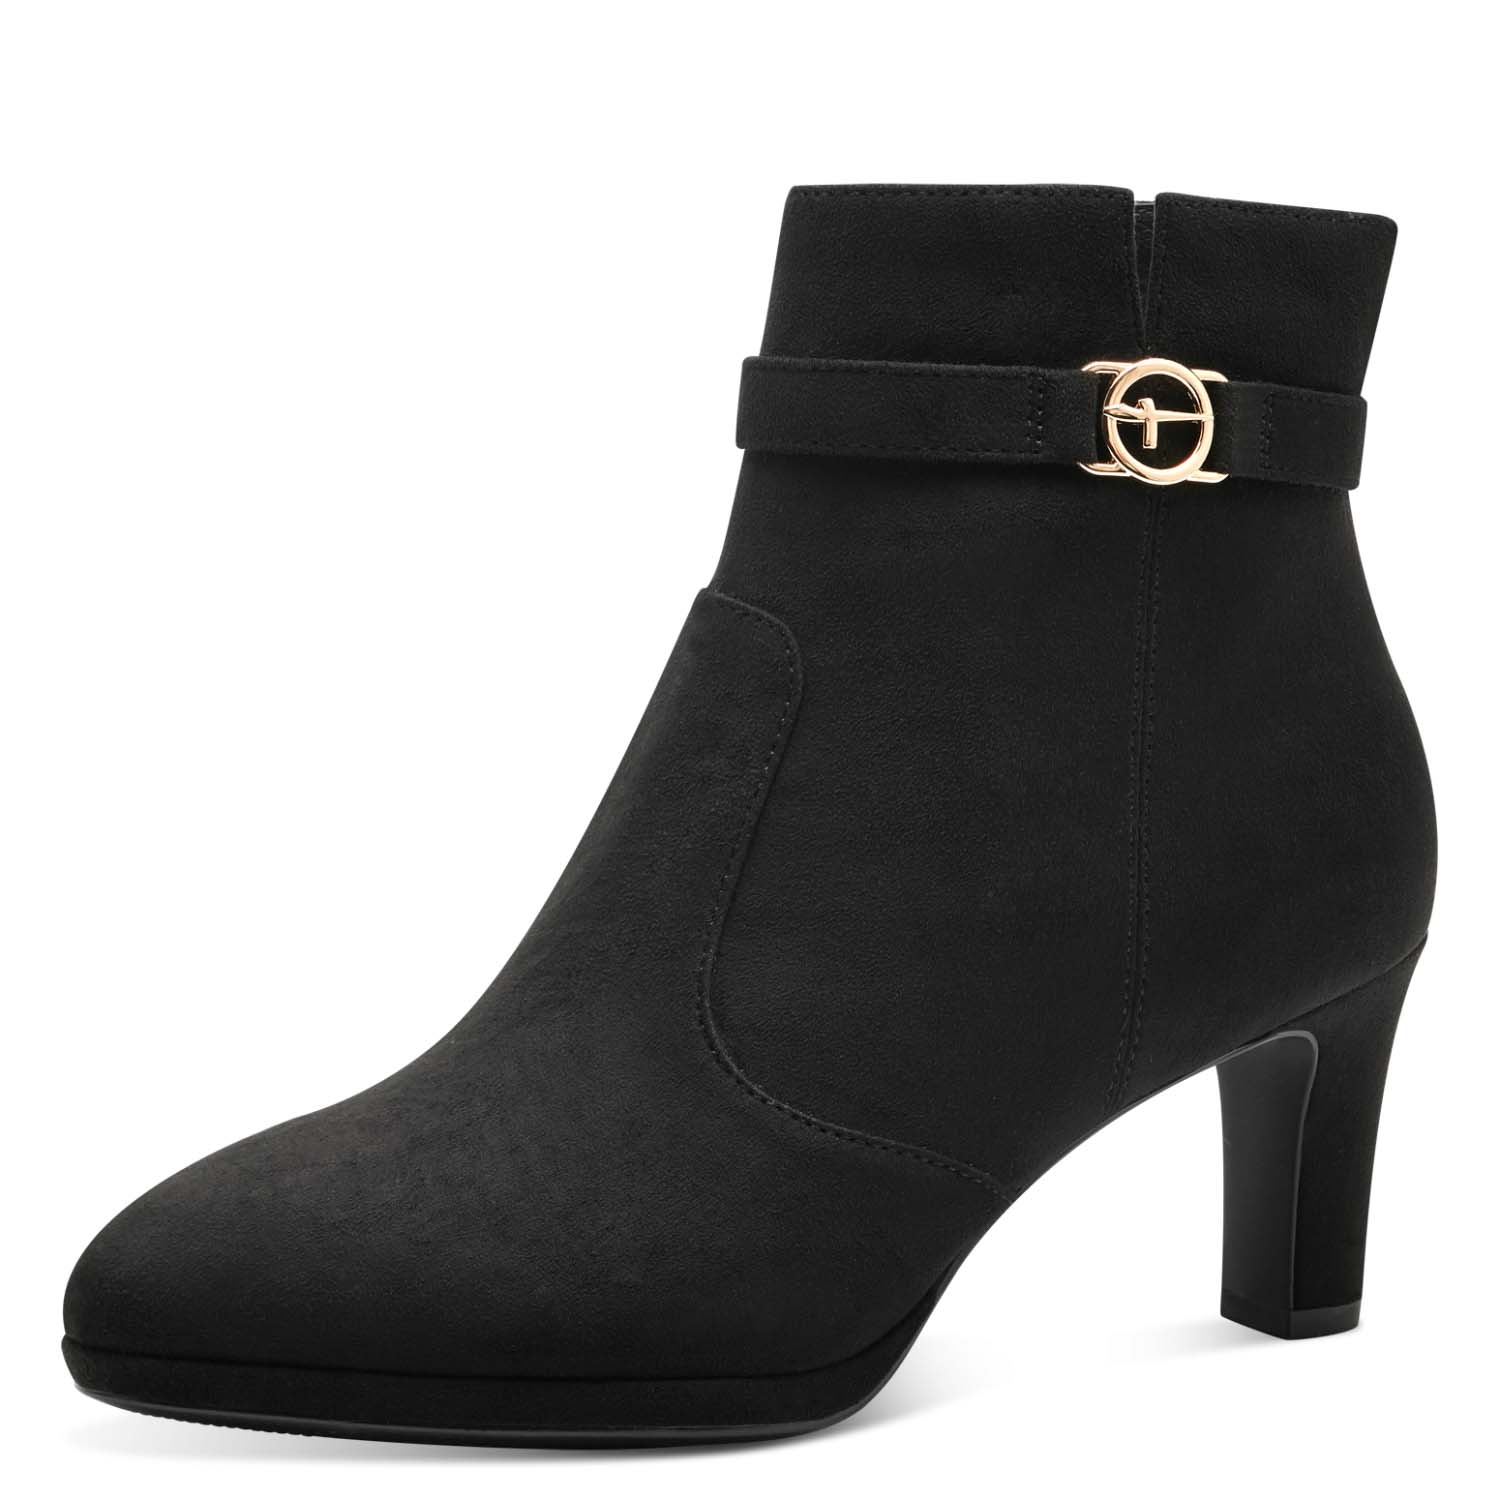 Angle view highlighting the thicker heel and imitation suede material of Tamaris Black Dressy Ankle Boot.